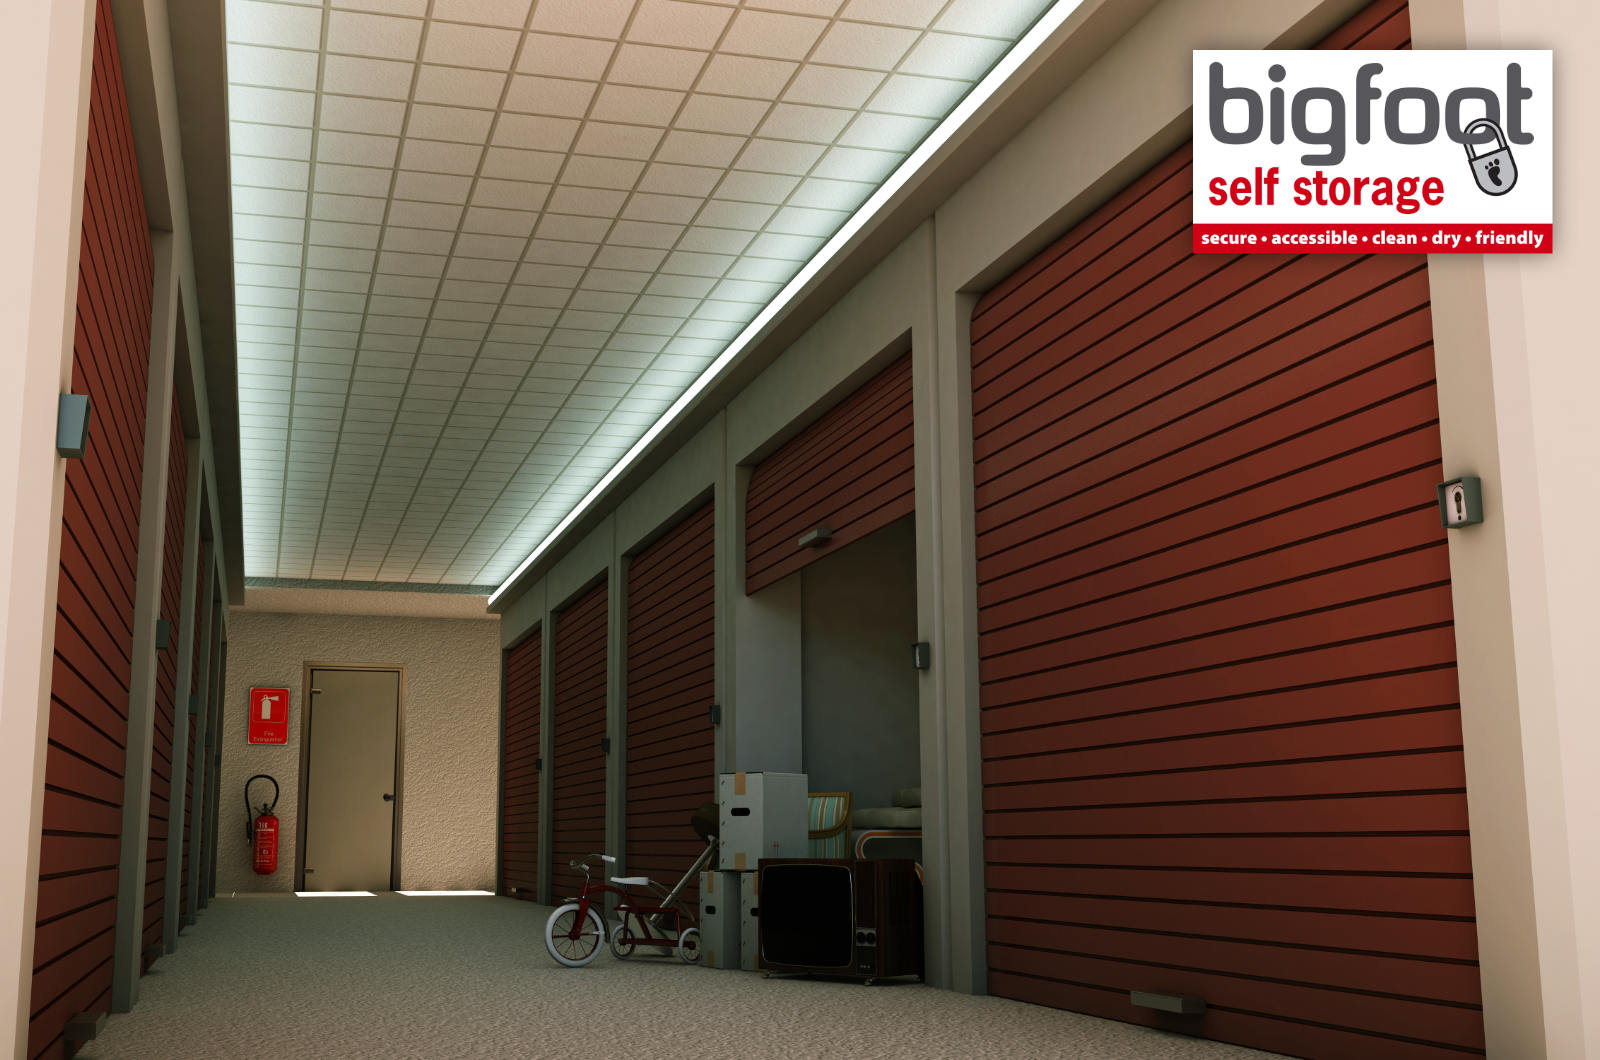 Is a storage unit worth investing in?